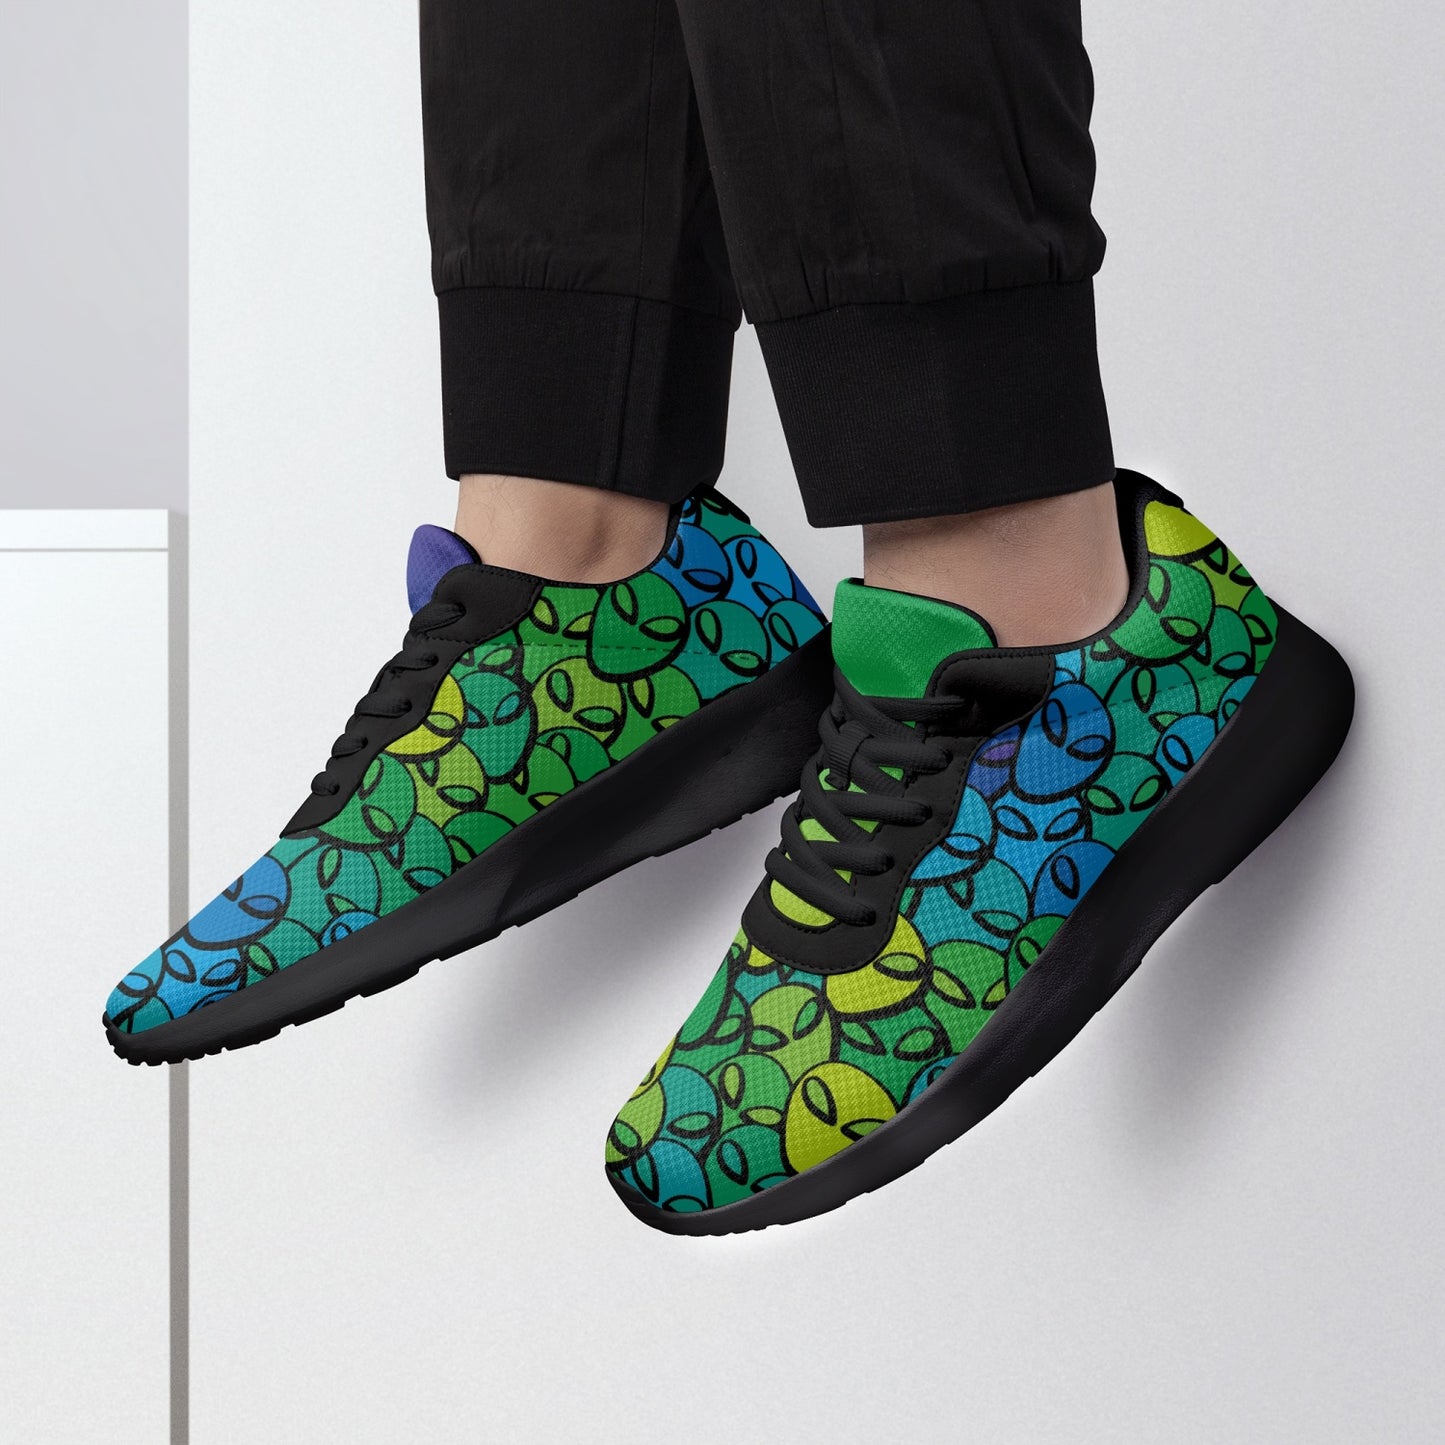 Weirdo | Colorful and weird shoes for women who like to stand out and be different! These shoes are blue/ green and have aliens printed all over the shoes.